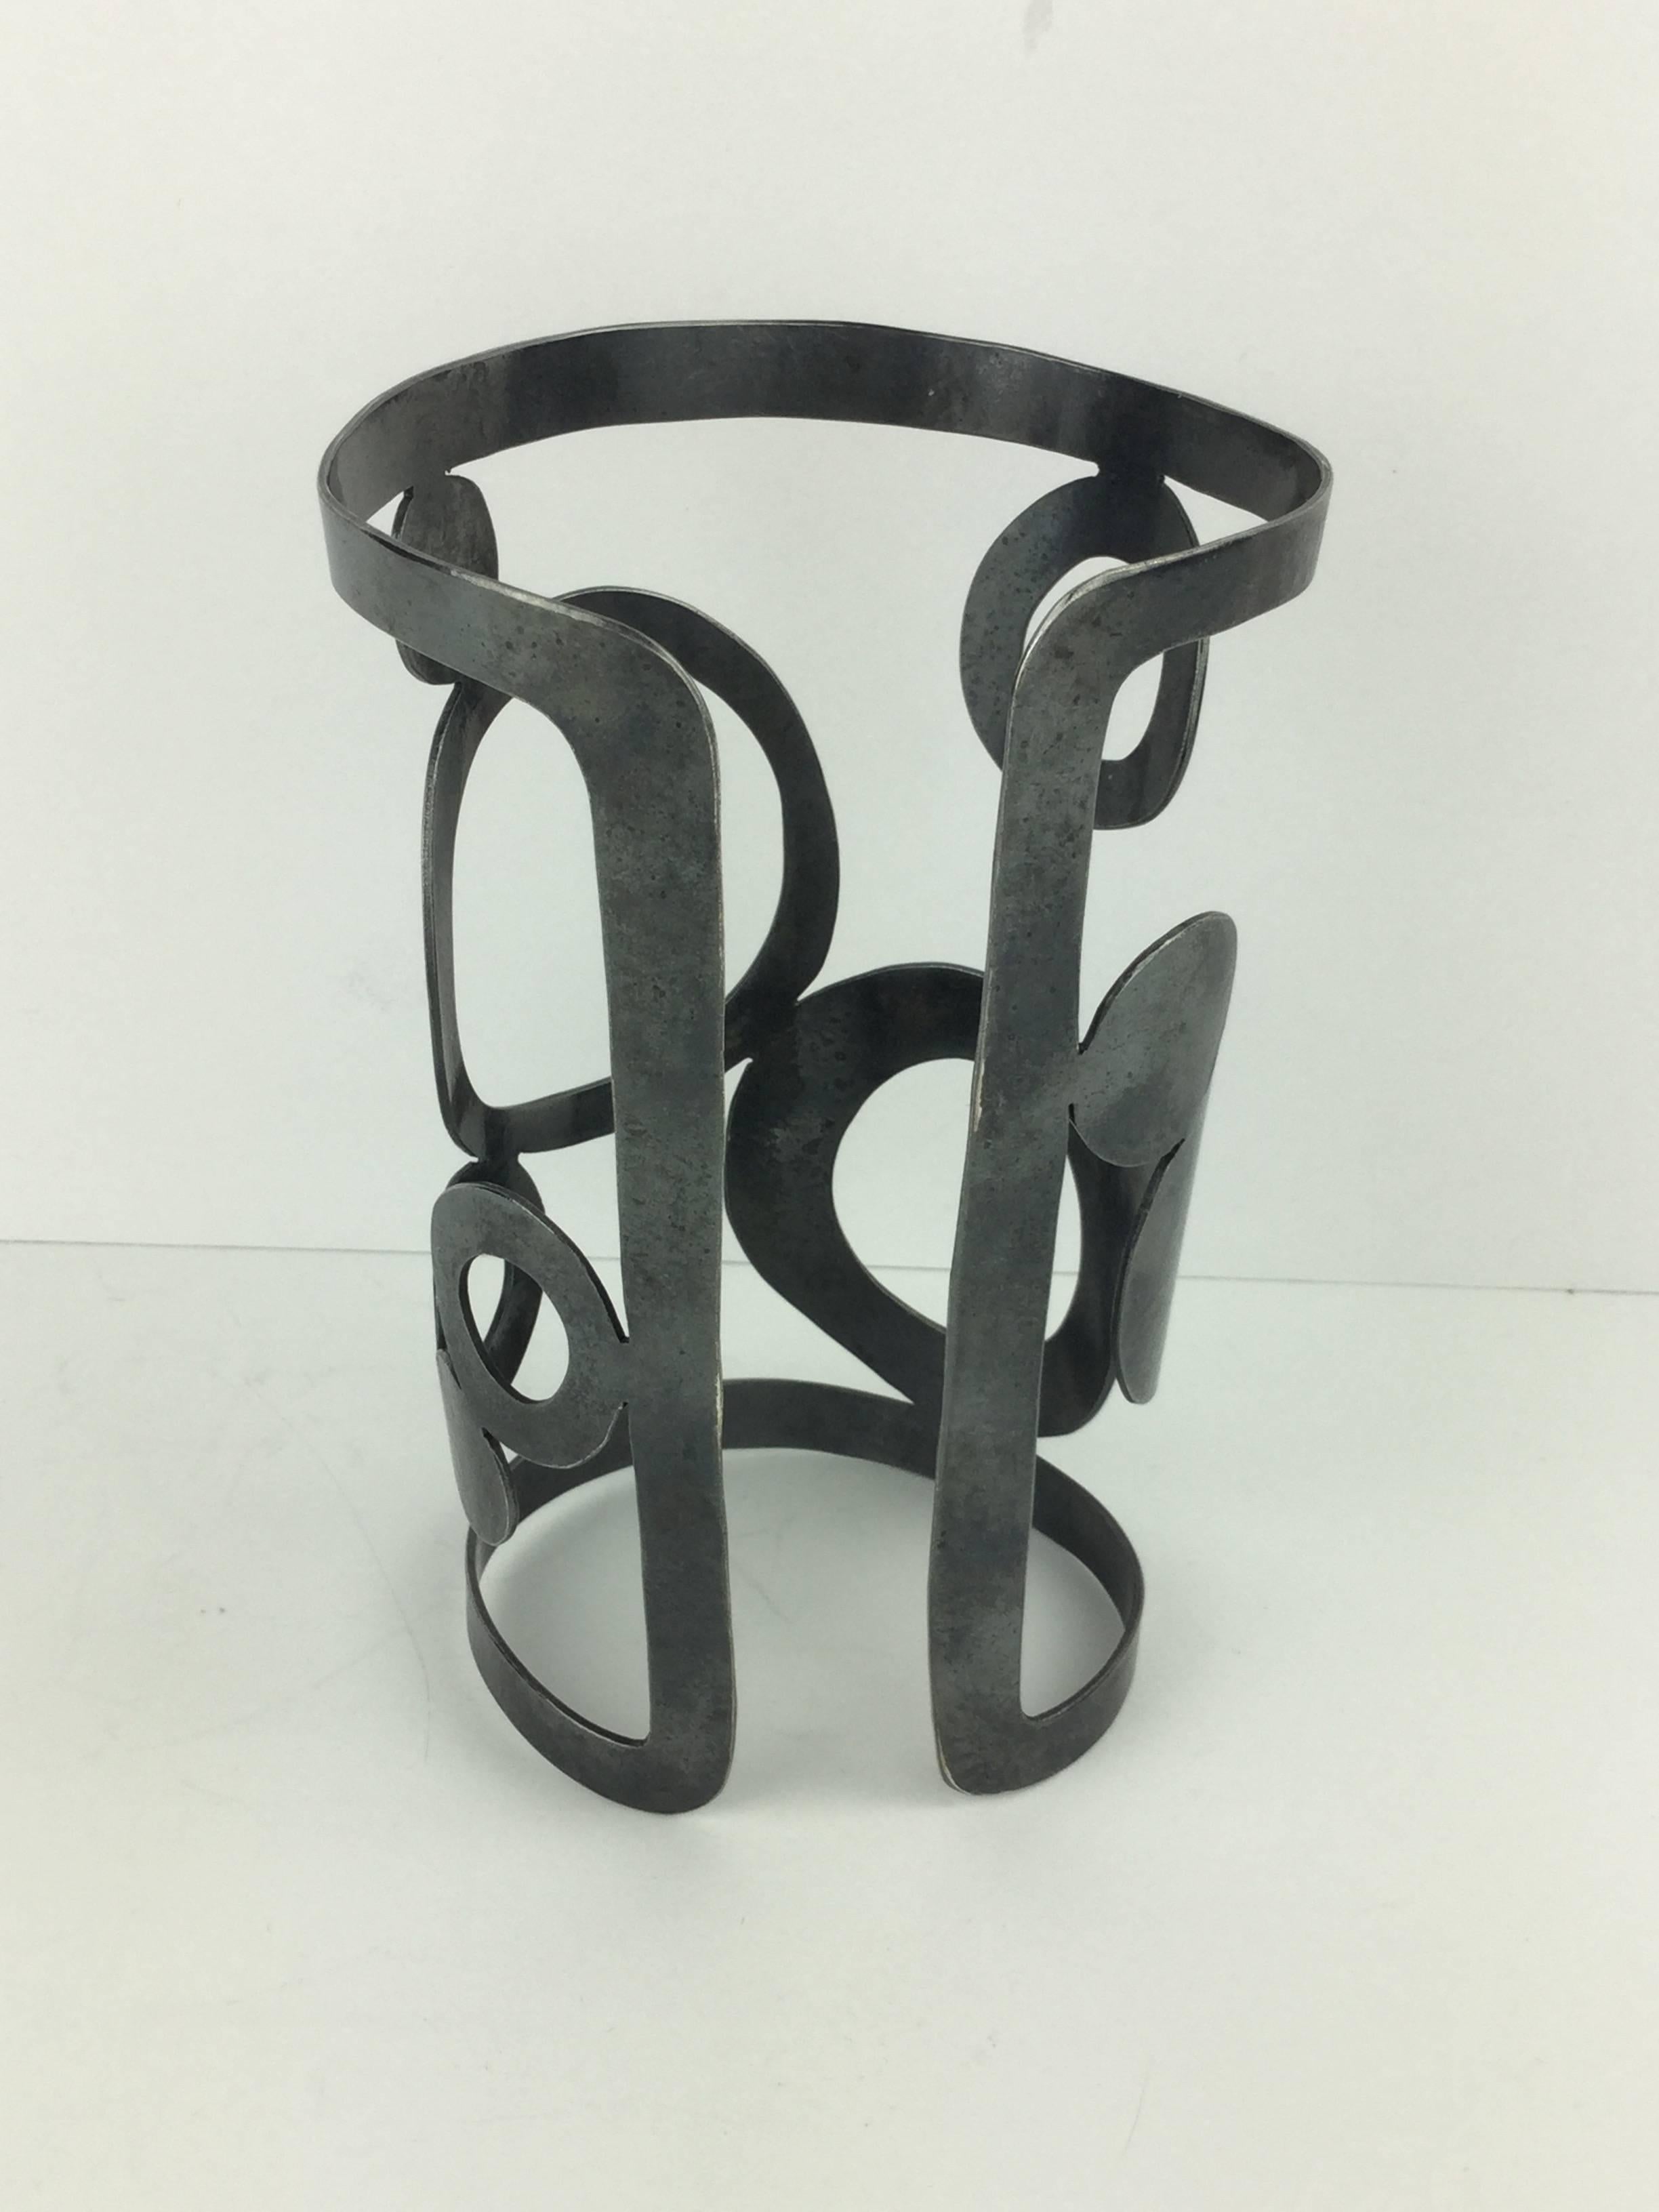 Incredible huge gladiator style metal cuff by Herve Van Der Straeten featuring geometric cut outs.
Widens going up from the wrist to enclose the lower arm. Excellent Condition. Signed: HV
Size:  5 inches tall. 3 inches wide at it's widest.  The